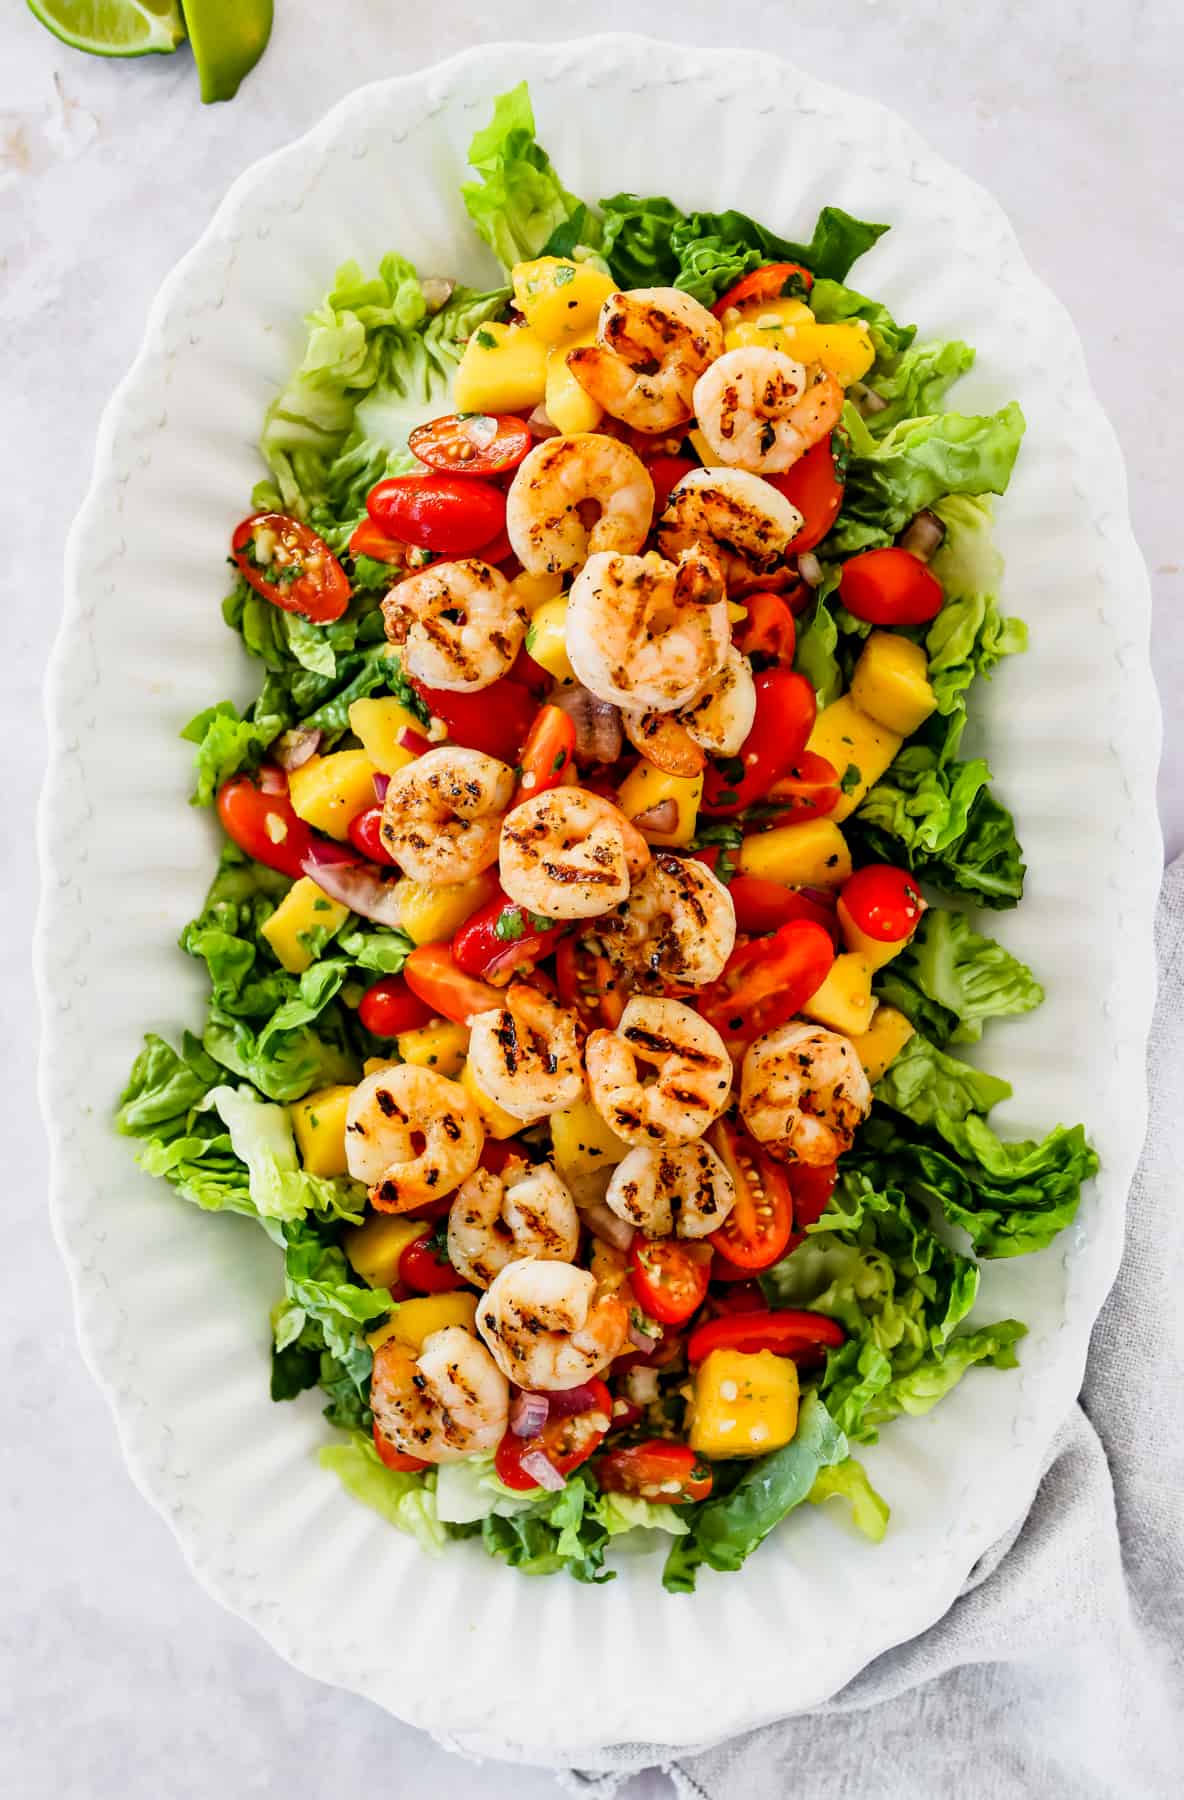 Oval serving platter with shrimp, mangoes, and cherry tomatoes arranged over salad greens.